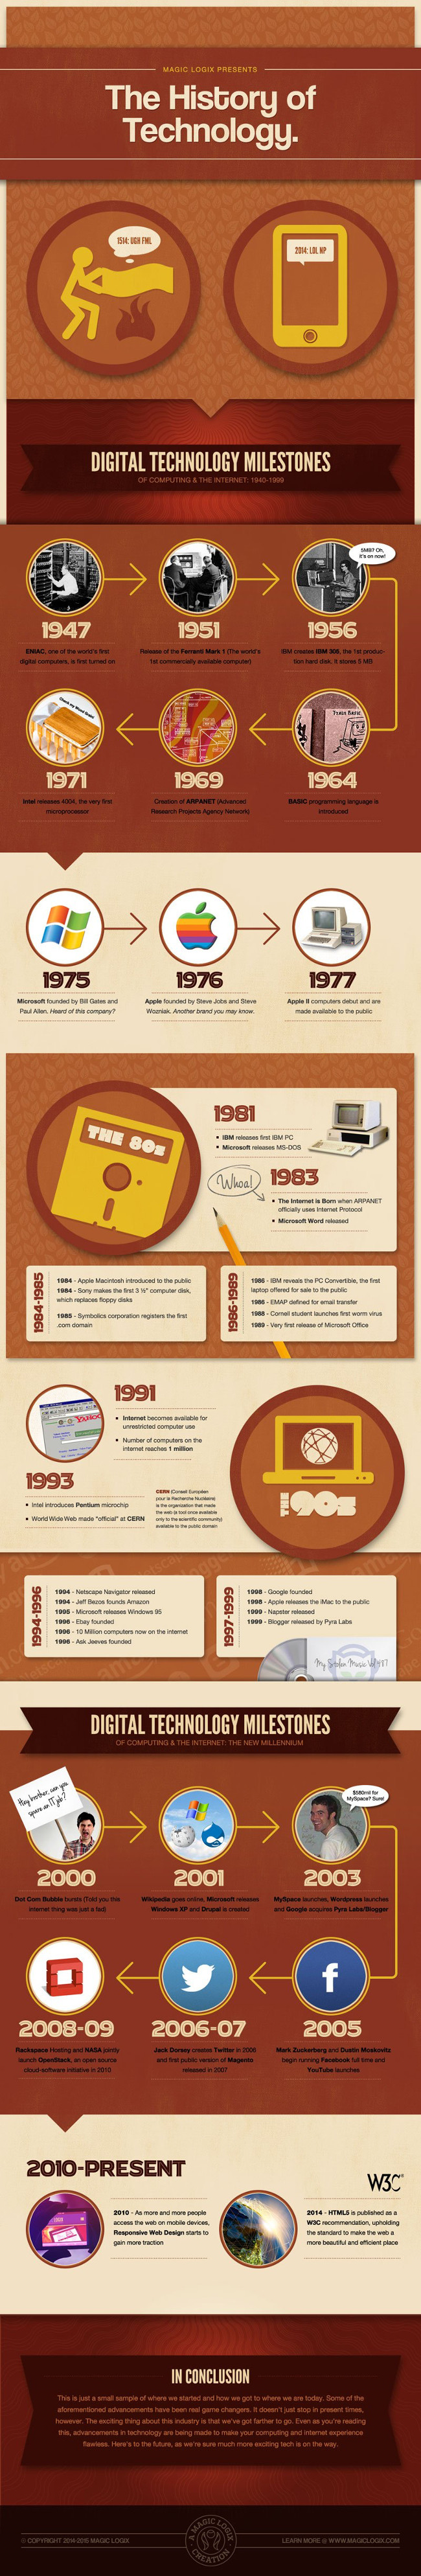 History of technology infographic